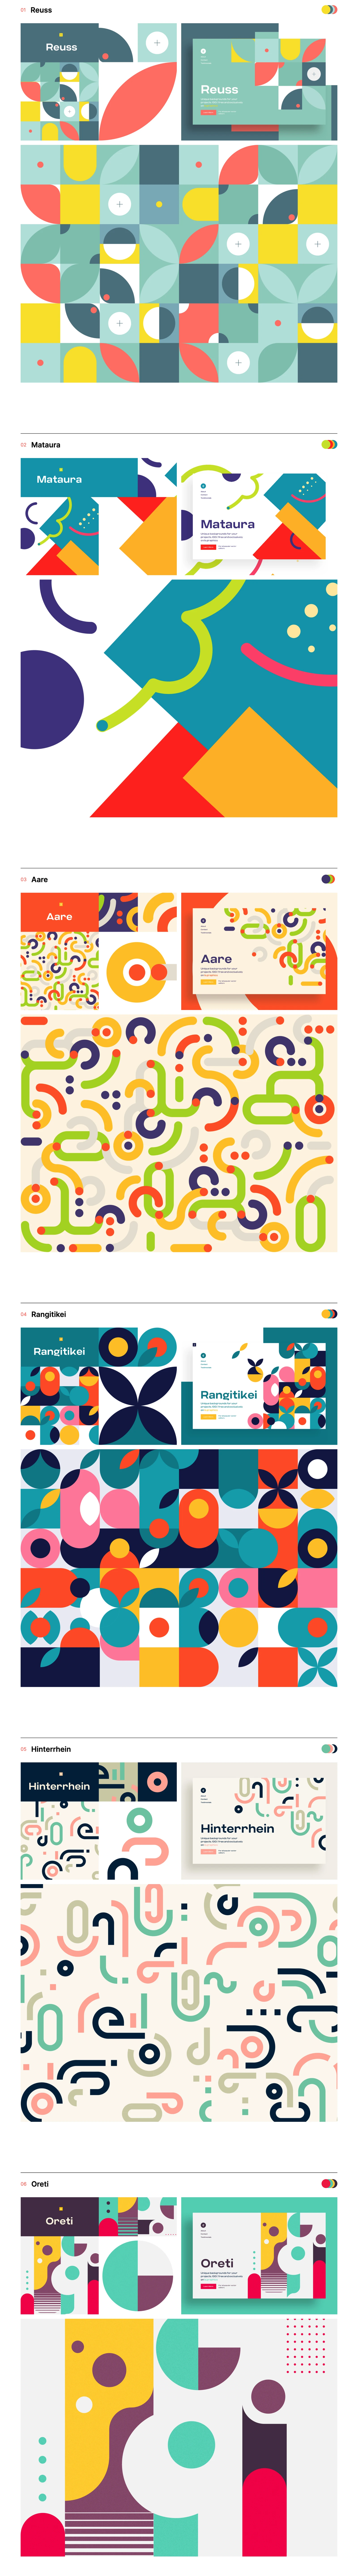 Paaatterns - Free handcrafted patterns - Free collection of beautiful patterns for all vector formats. Handcrafted patterns for your commercial and personal projects. For Sketch, Figma, XD, Illustrator. In png and svg